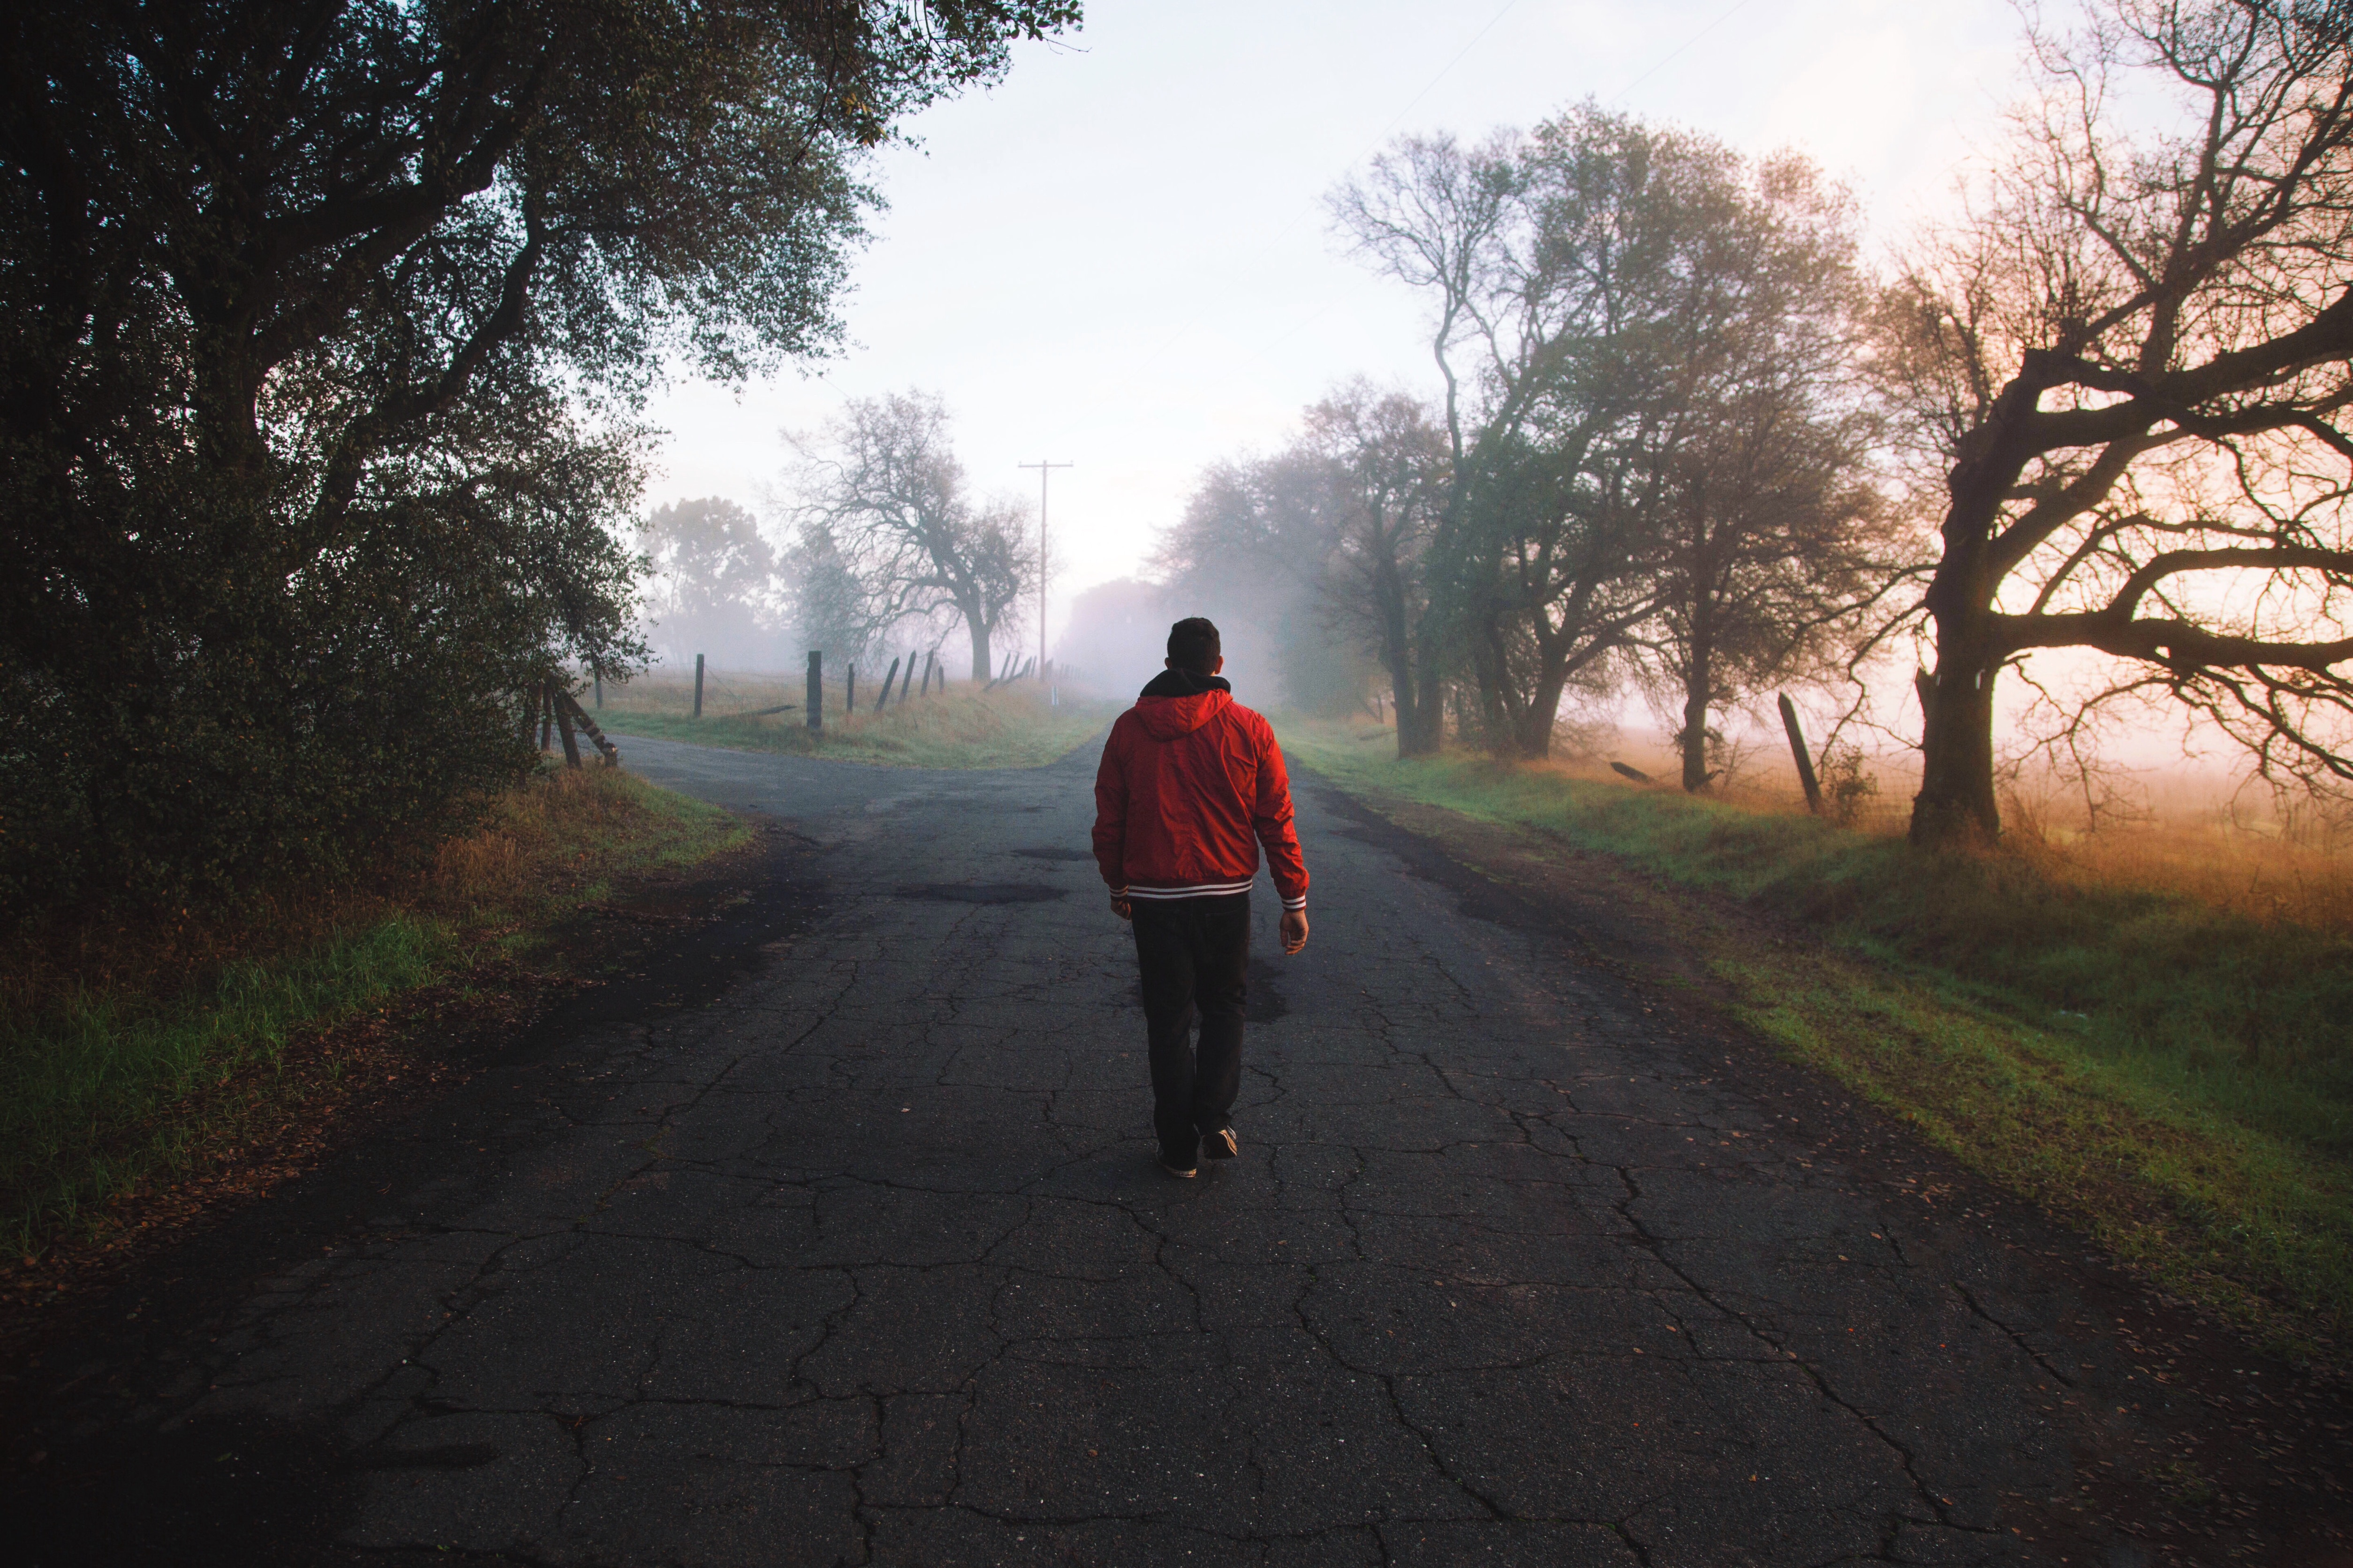 5017x3344 #walk, #hoodi, #looking out, #perspective, #jog, #sunrise, #long, #fog, #person, #tree, #man, #Free image, #road trip, #sunset, #morning, #hike, #soliltude, #isolation, #forest, #road, #red jacket. Mocah HD Wallpaper